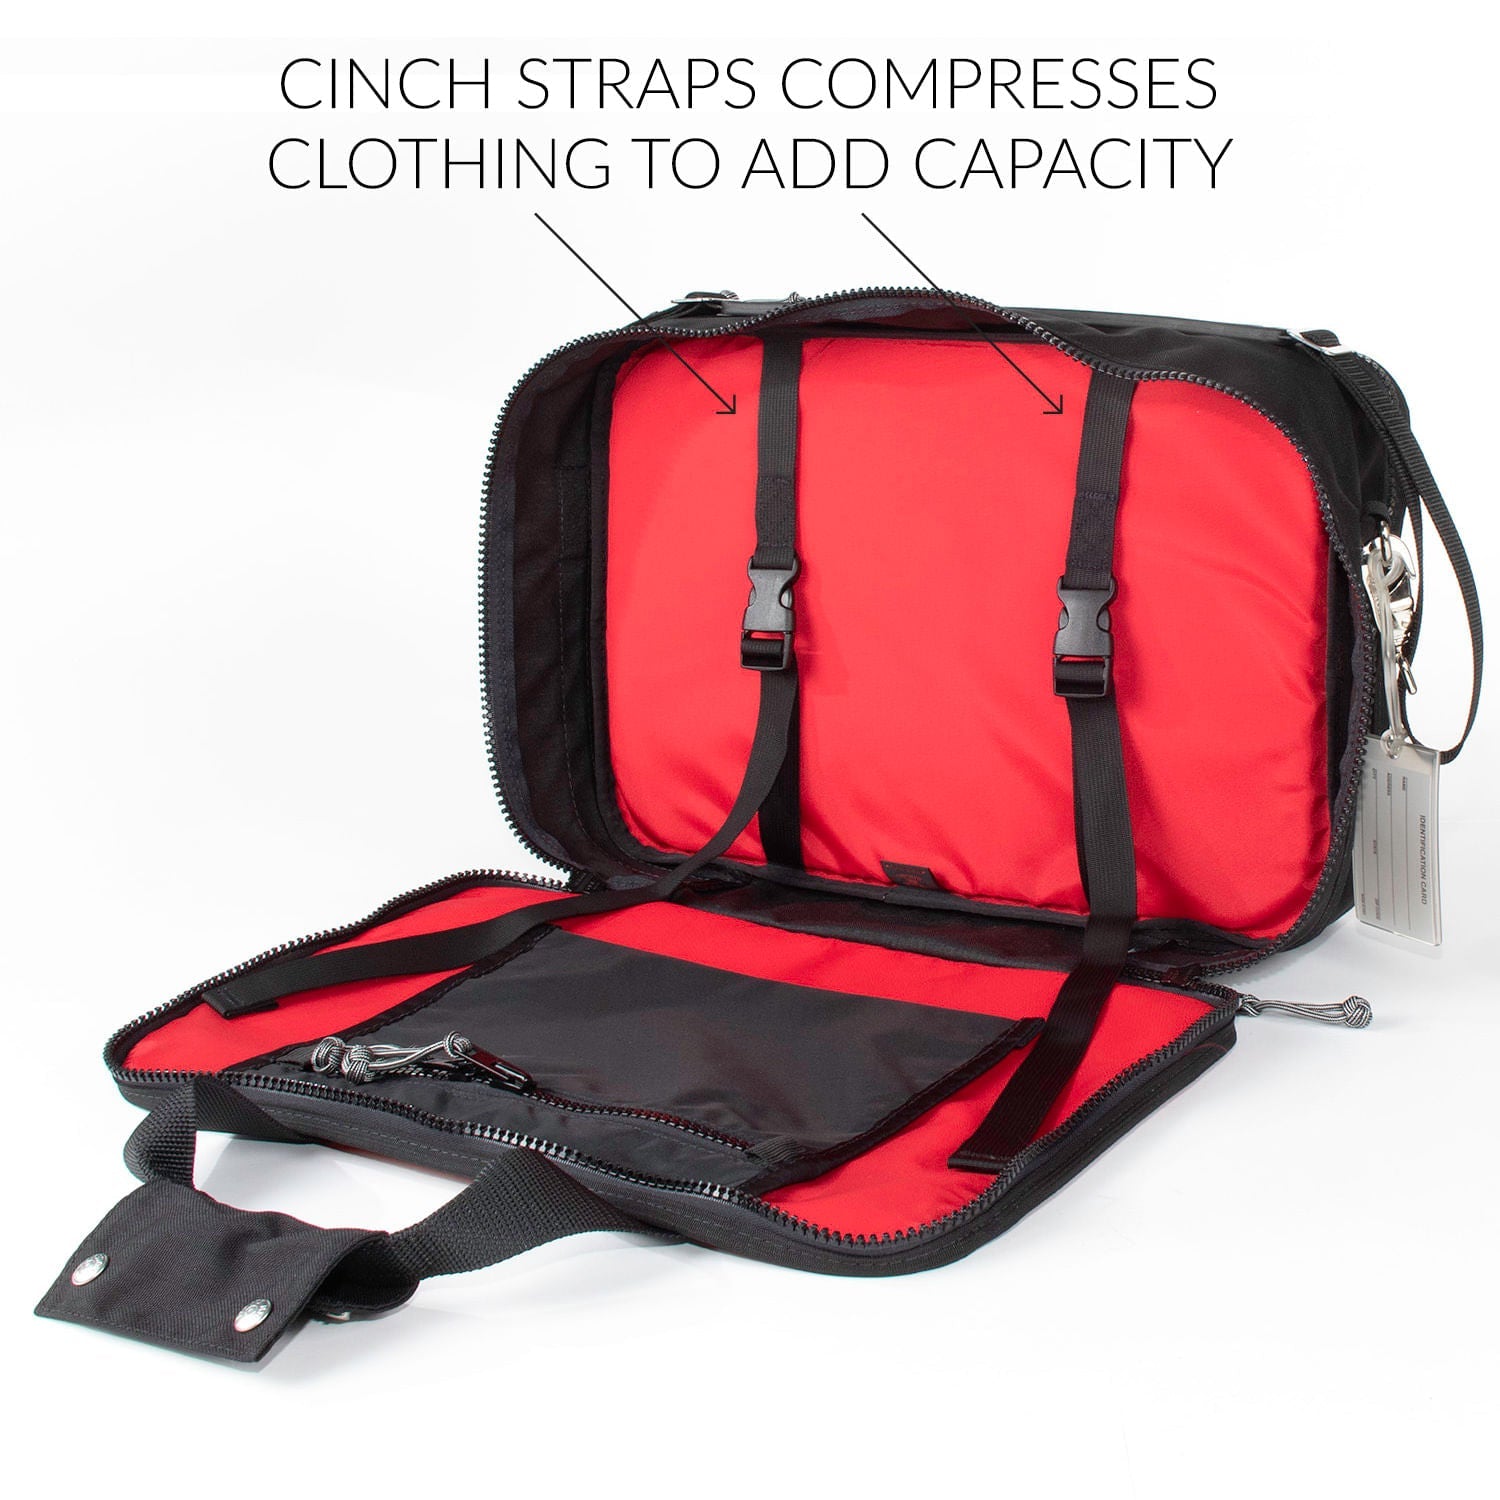 Cinch straps compress clothing to add capacity. 